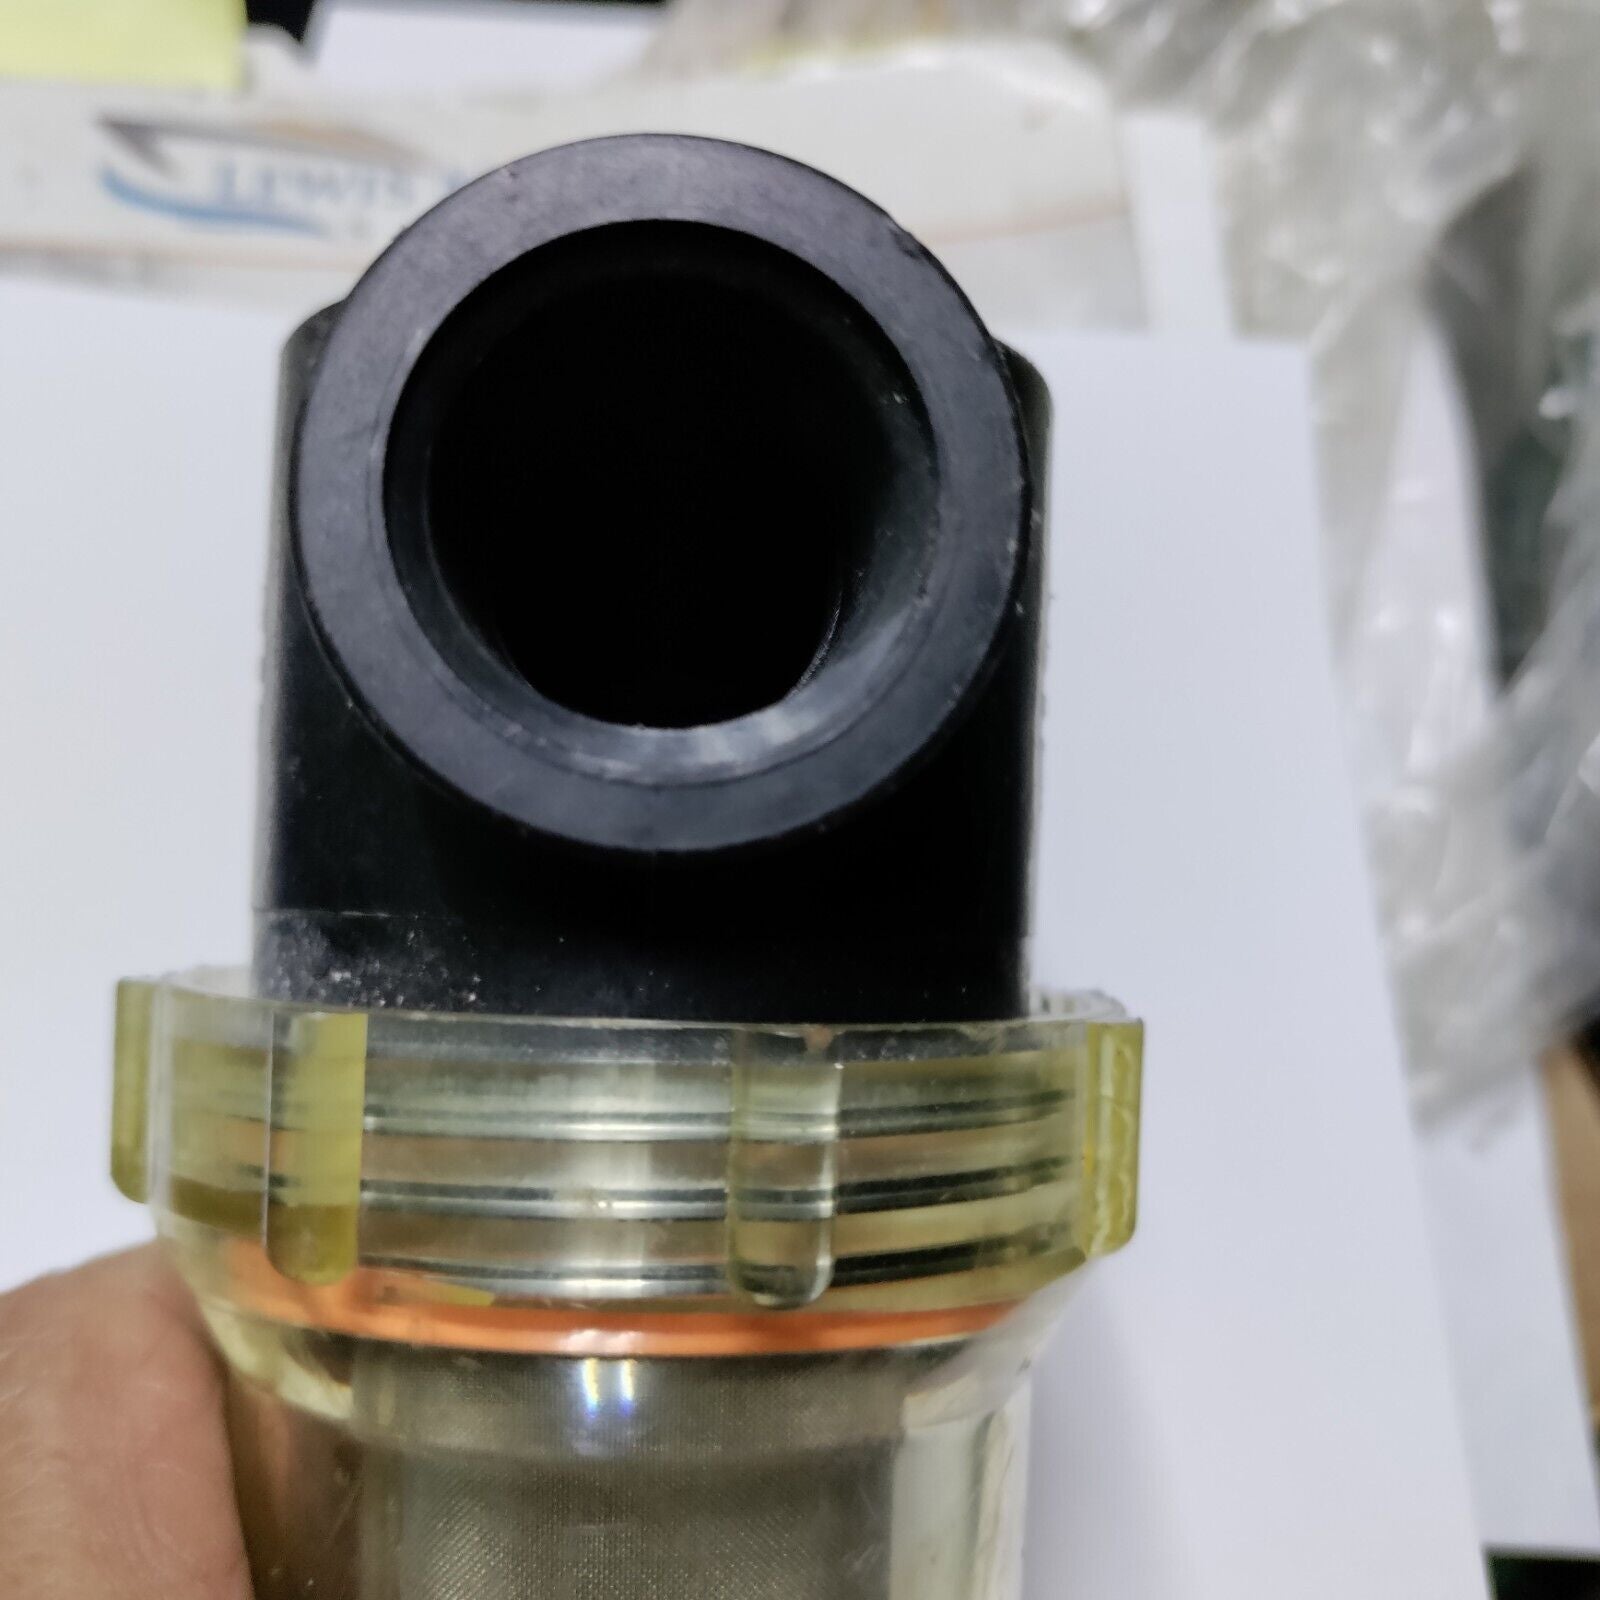 FRESH WATER FILTER, 3/4 INCH NPT QUICK DISCONNECT FOR MARINE WATER SYSTEM